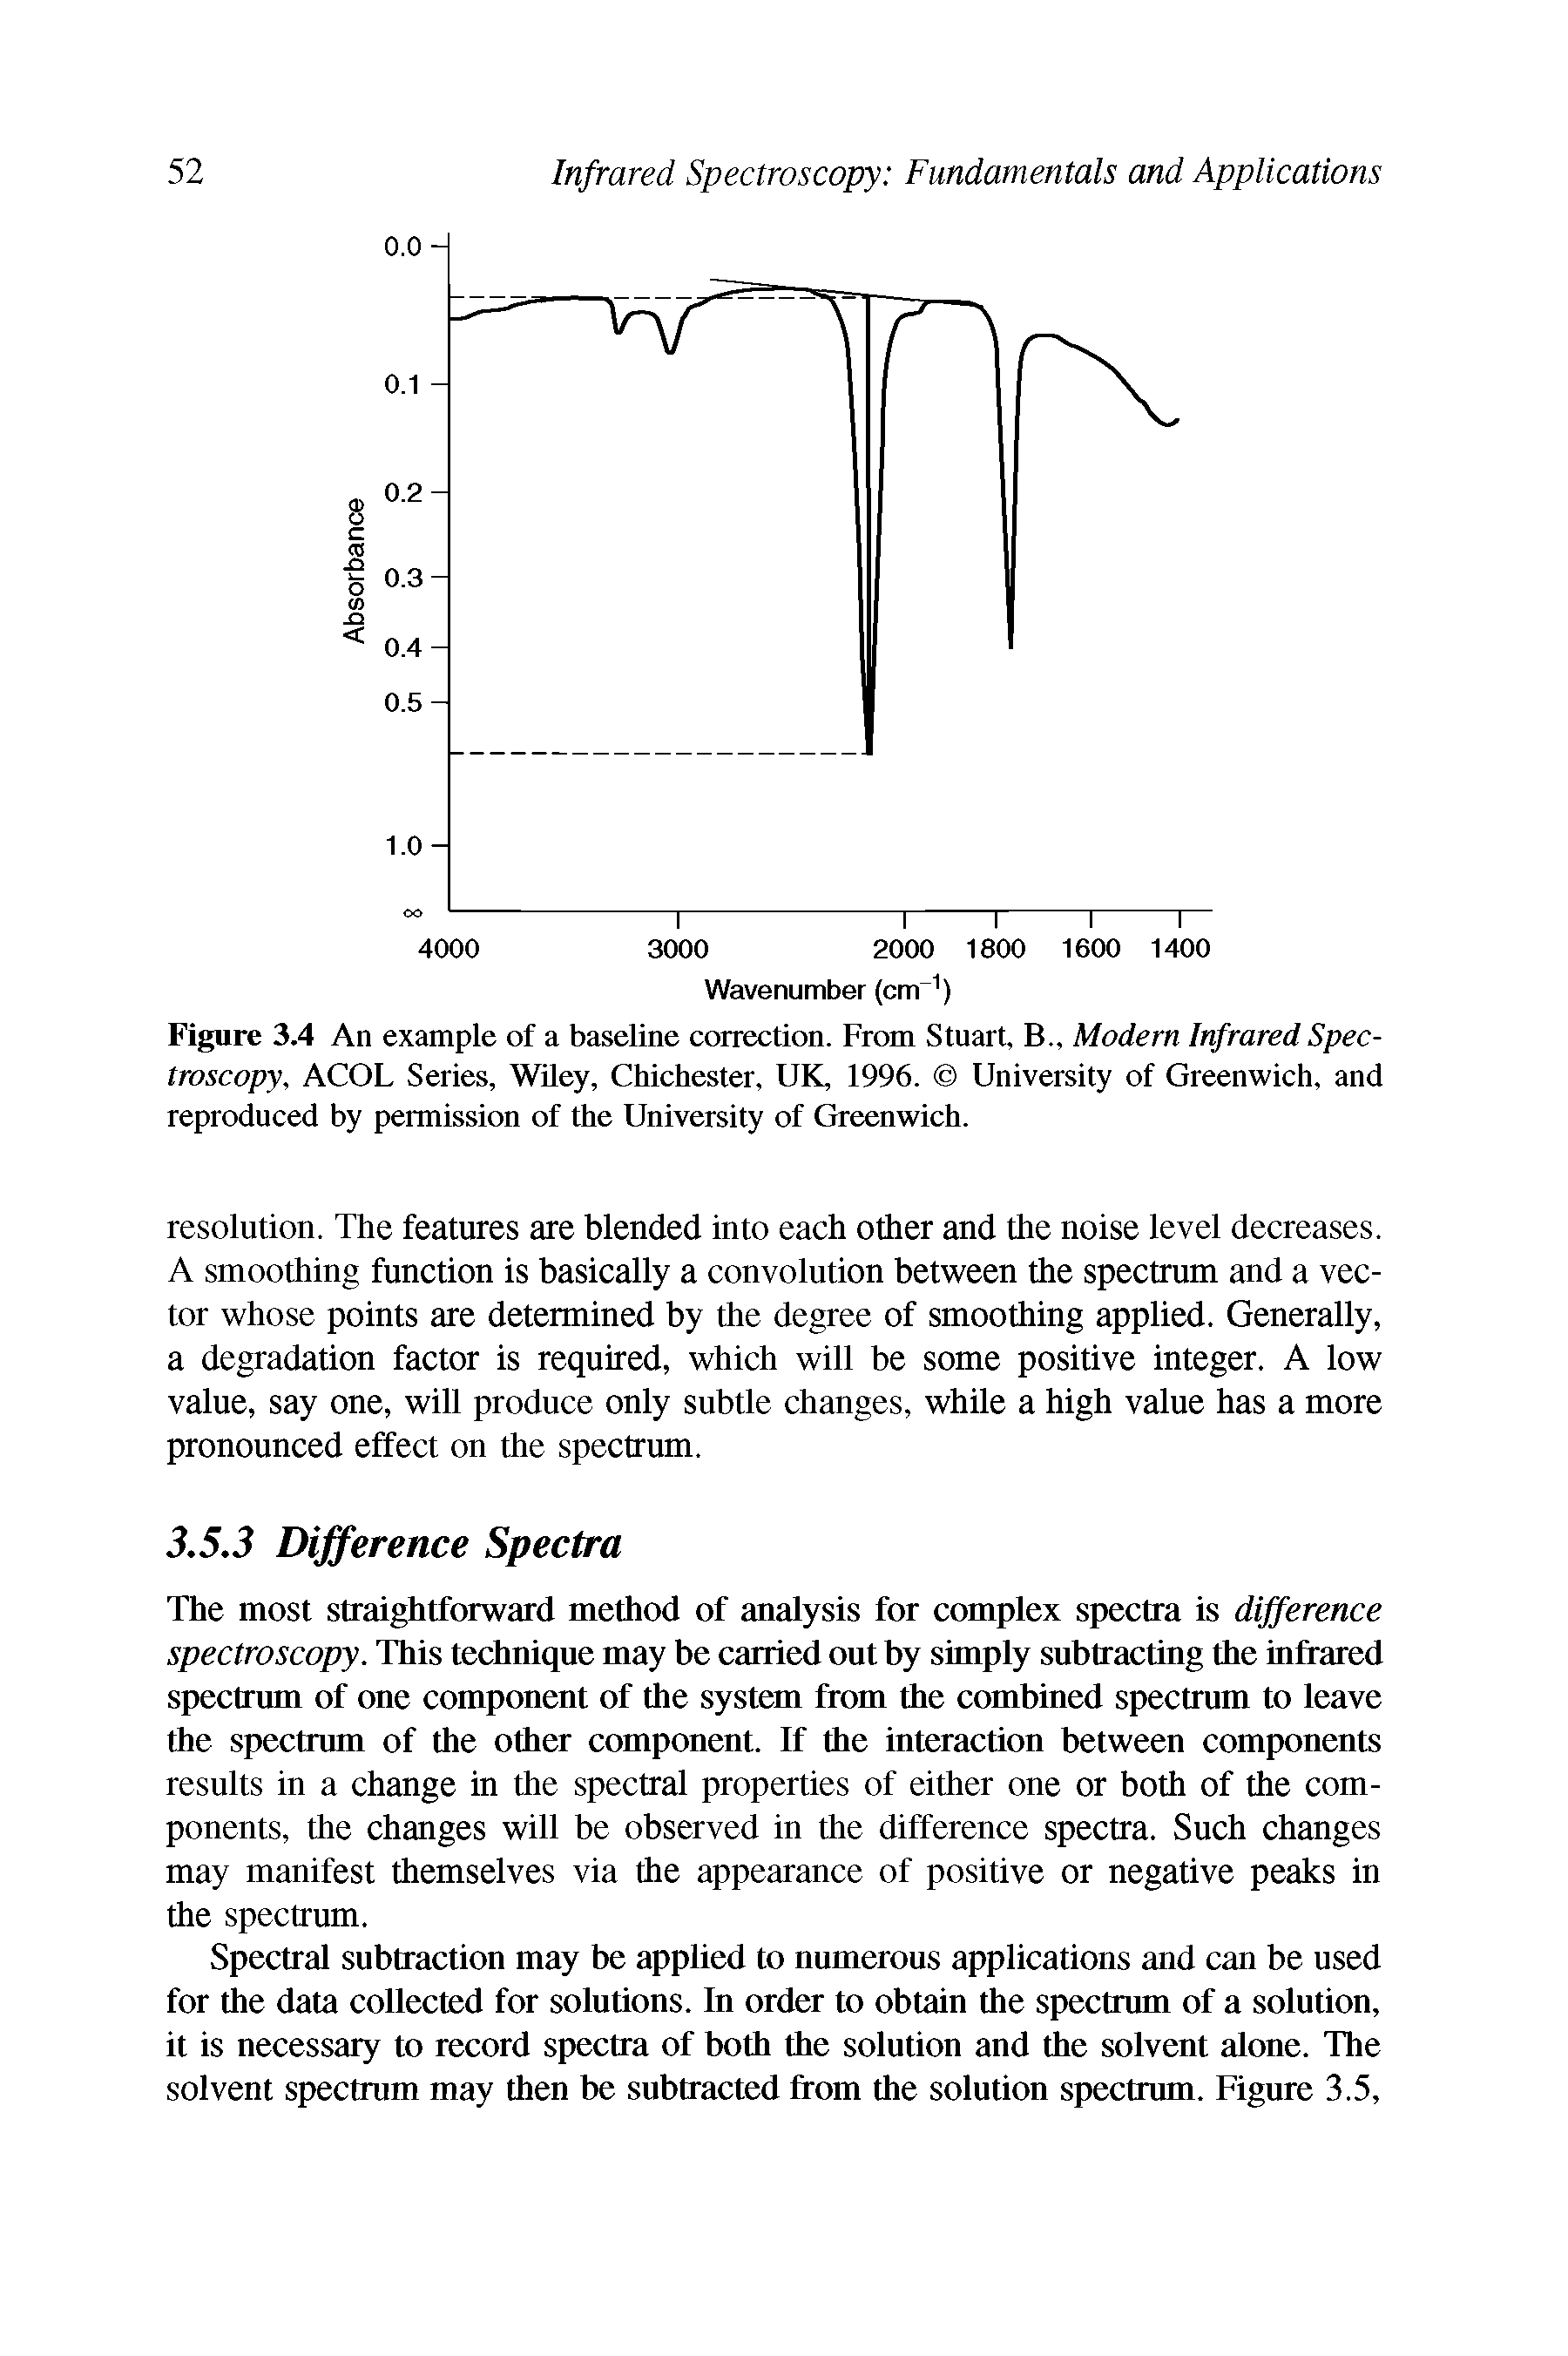 Figure 3.4 An example of a baseline correction. From Stuart, B Modem Infrared Spectroscopy, ACOL Series, WUey, Chichester, UK, 1996. University of Greenwich, and reproduced by permission of the University of Greenwich.